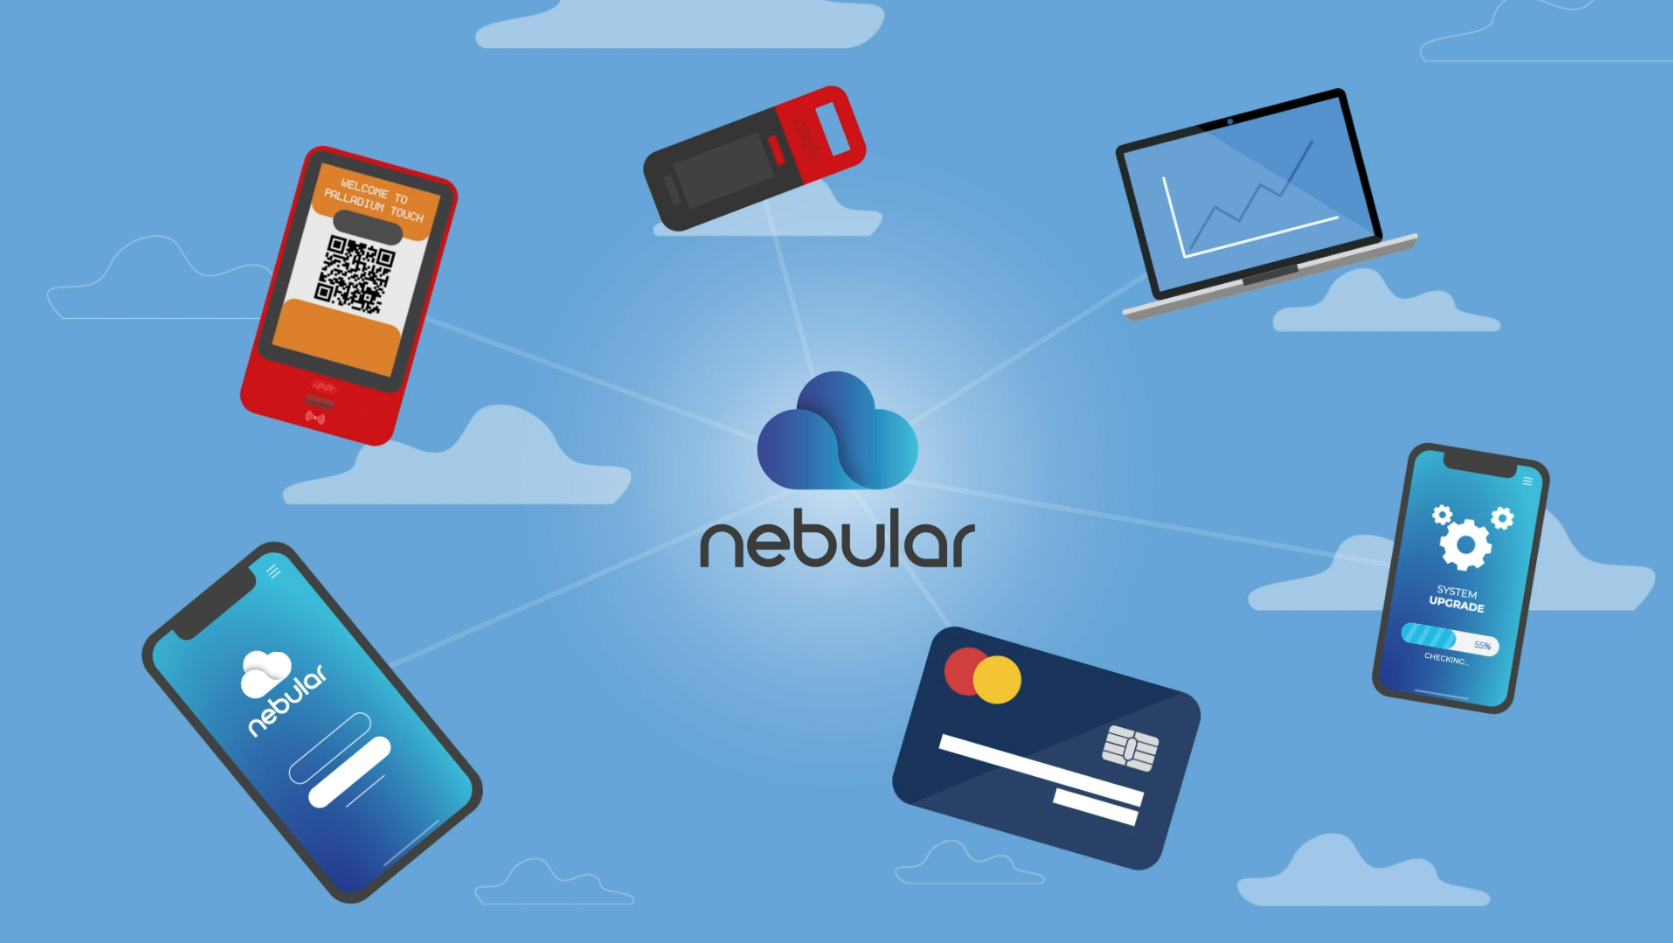 Nebular, the complete payment system for your vending machine